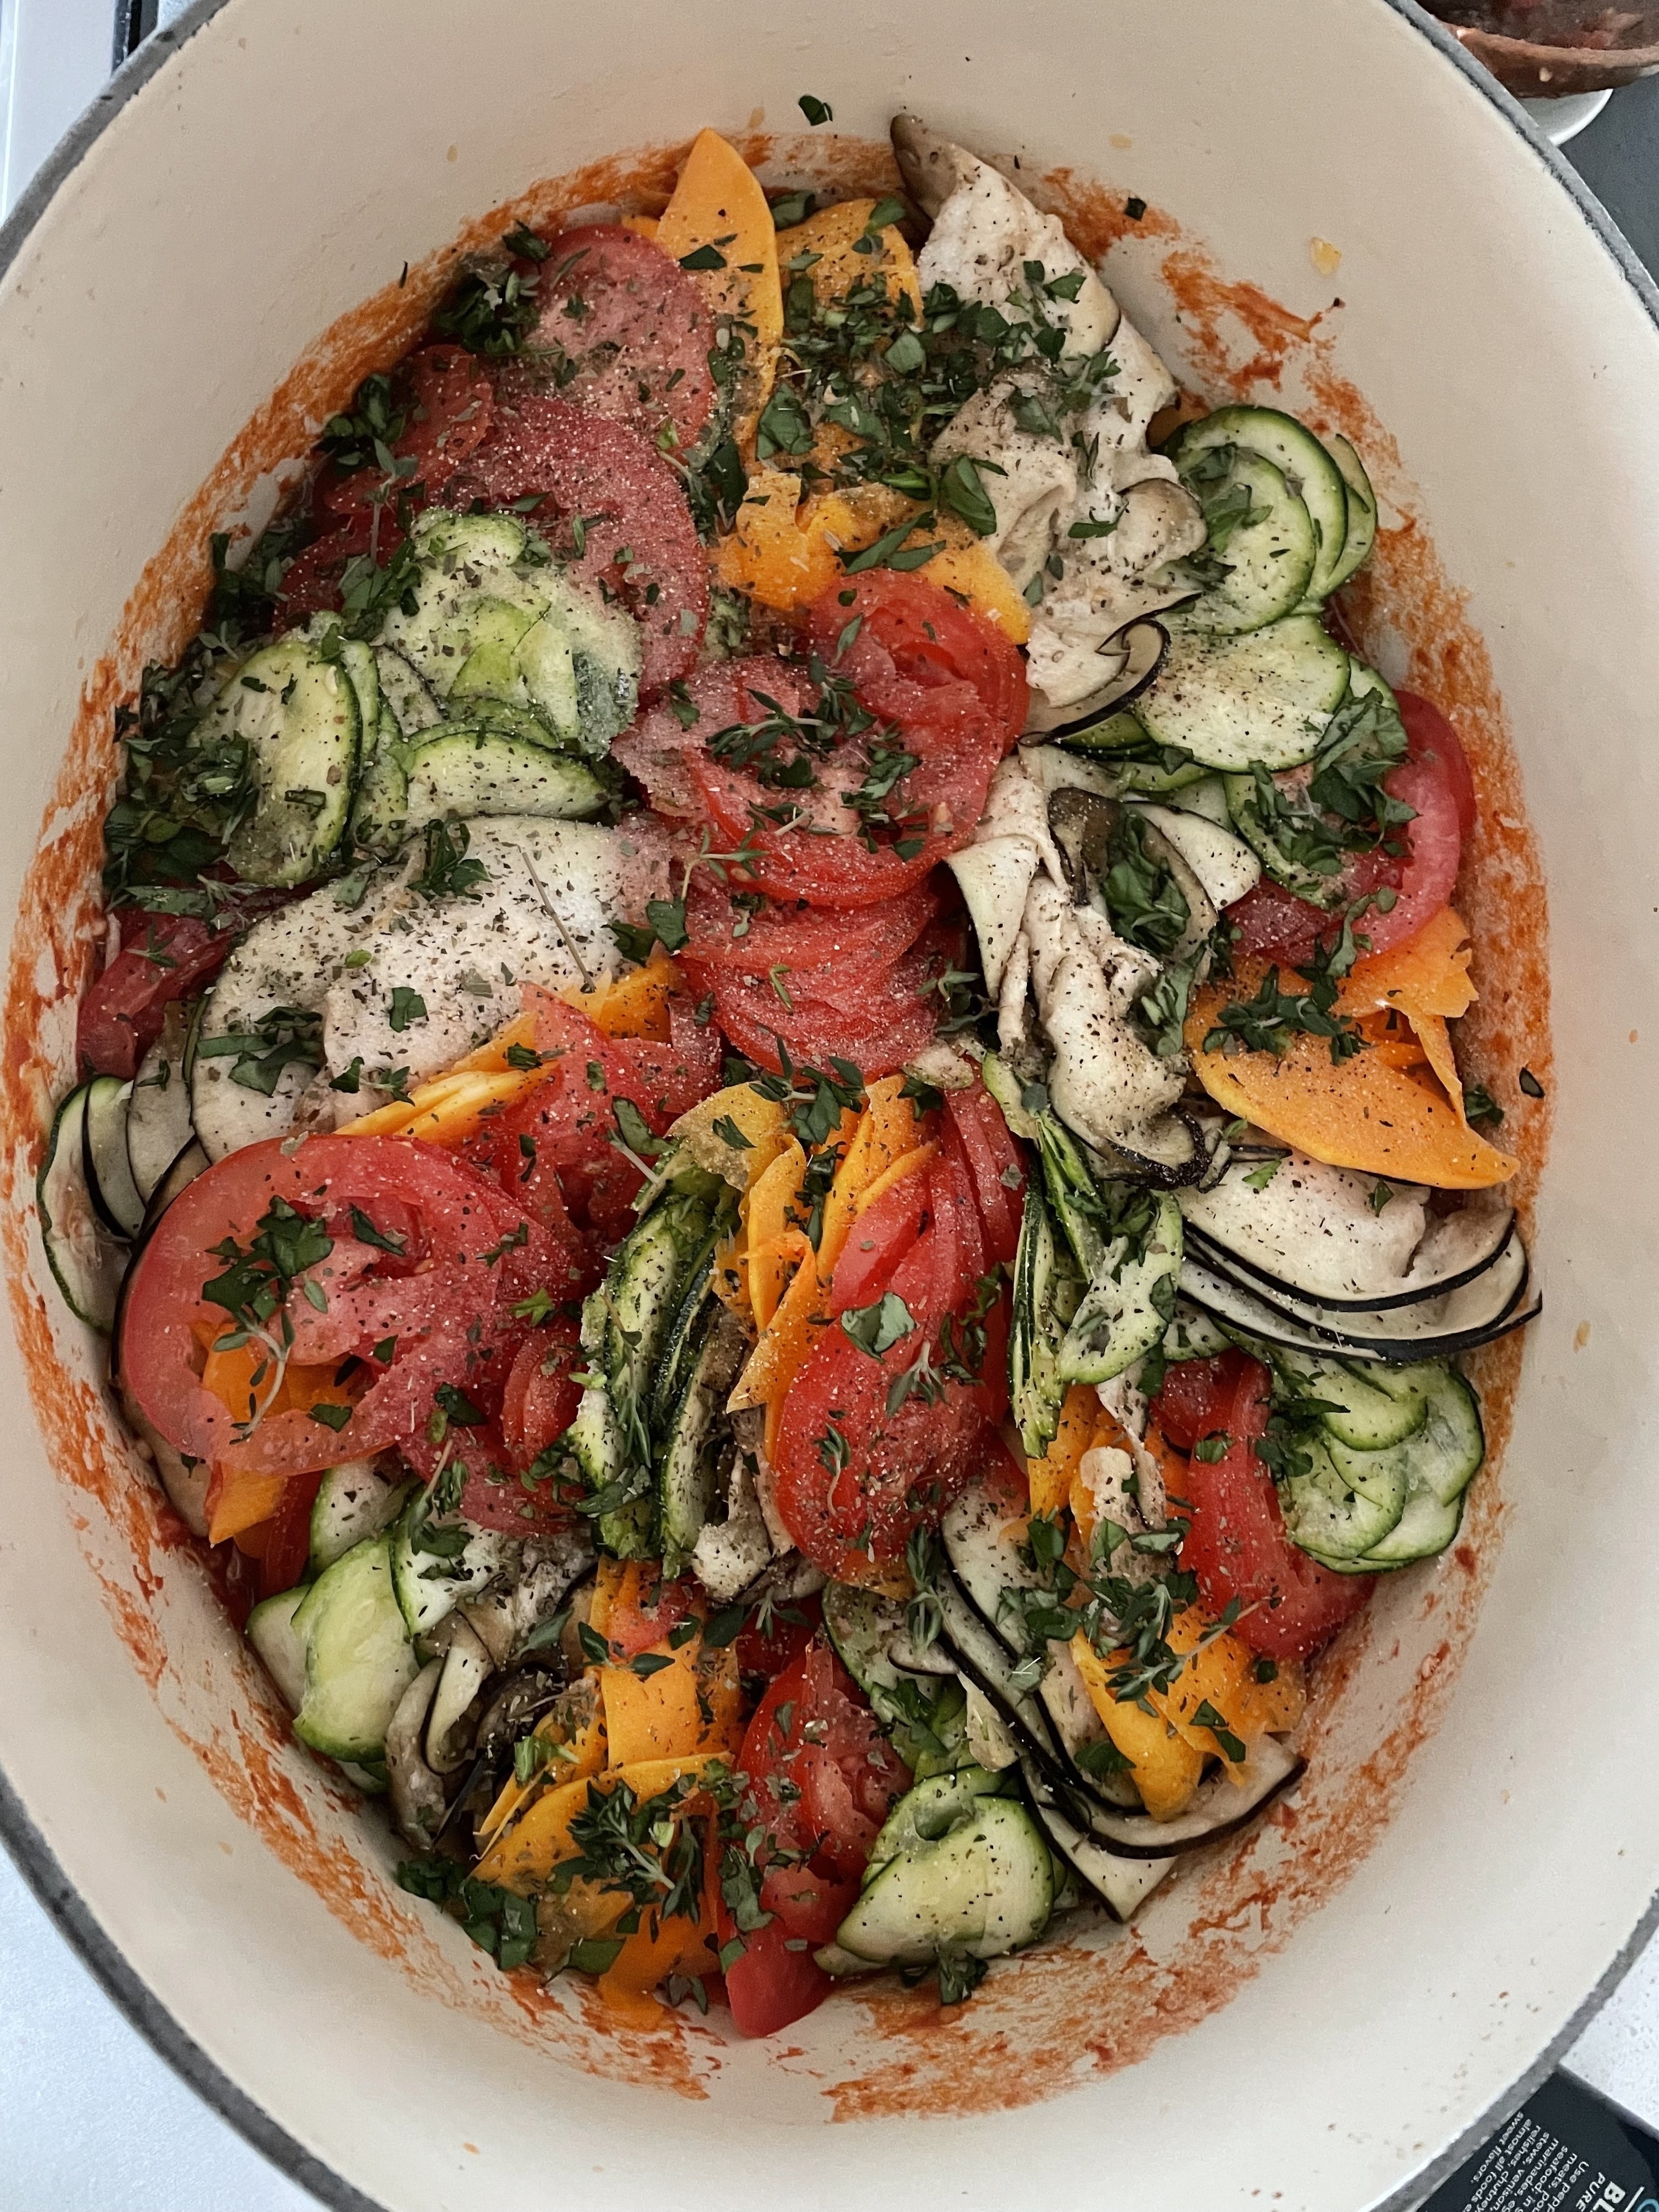 Ratatouille made with roasted vegetables.